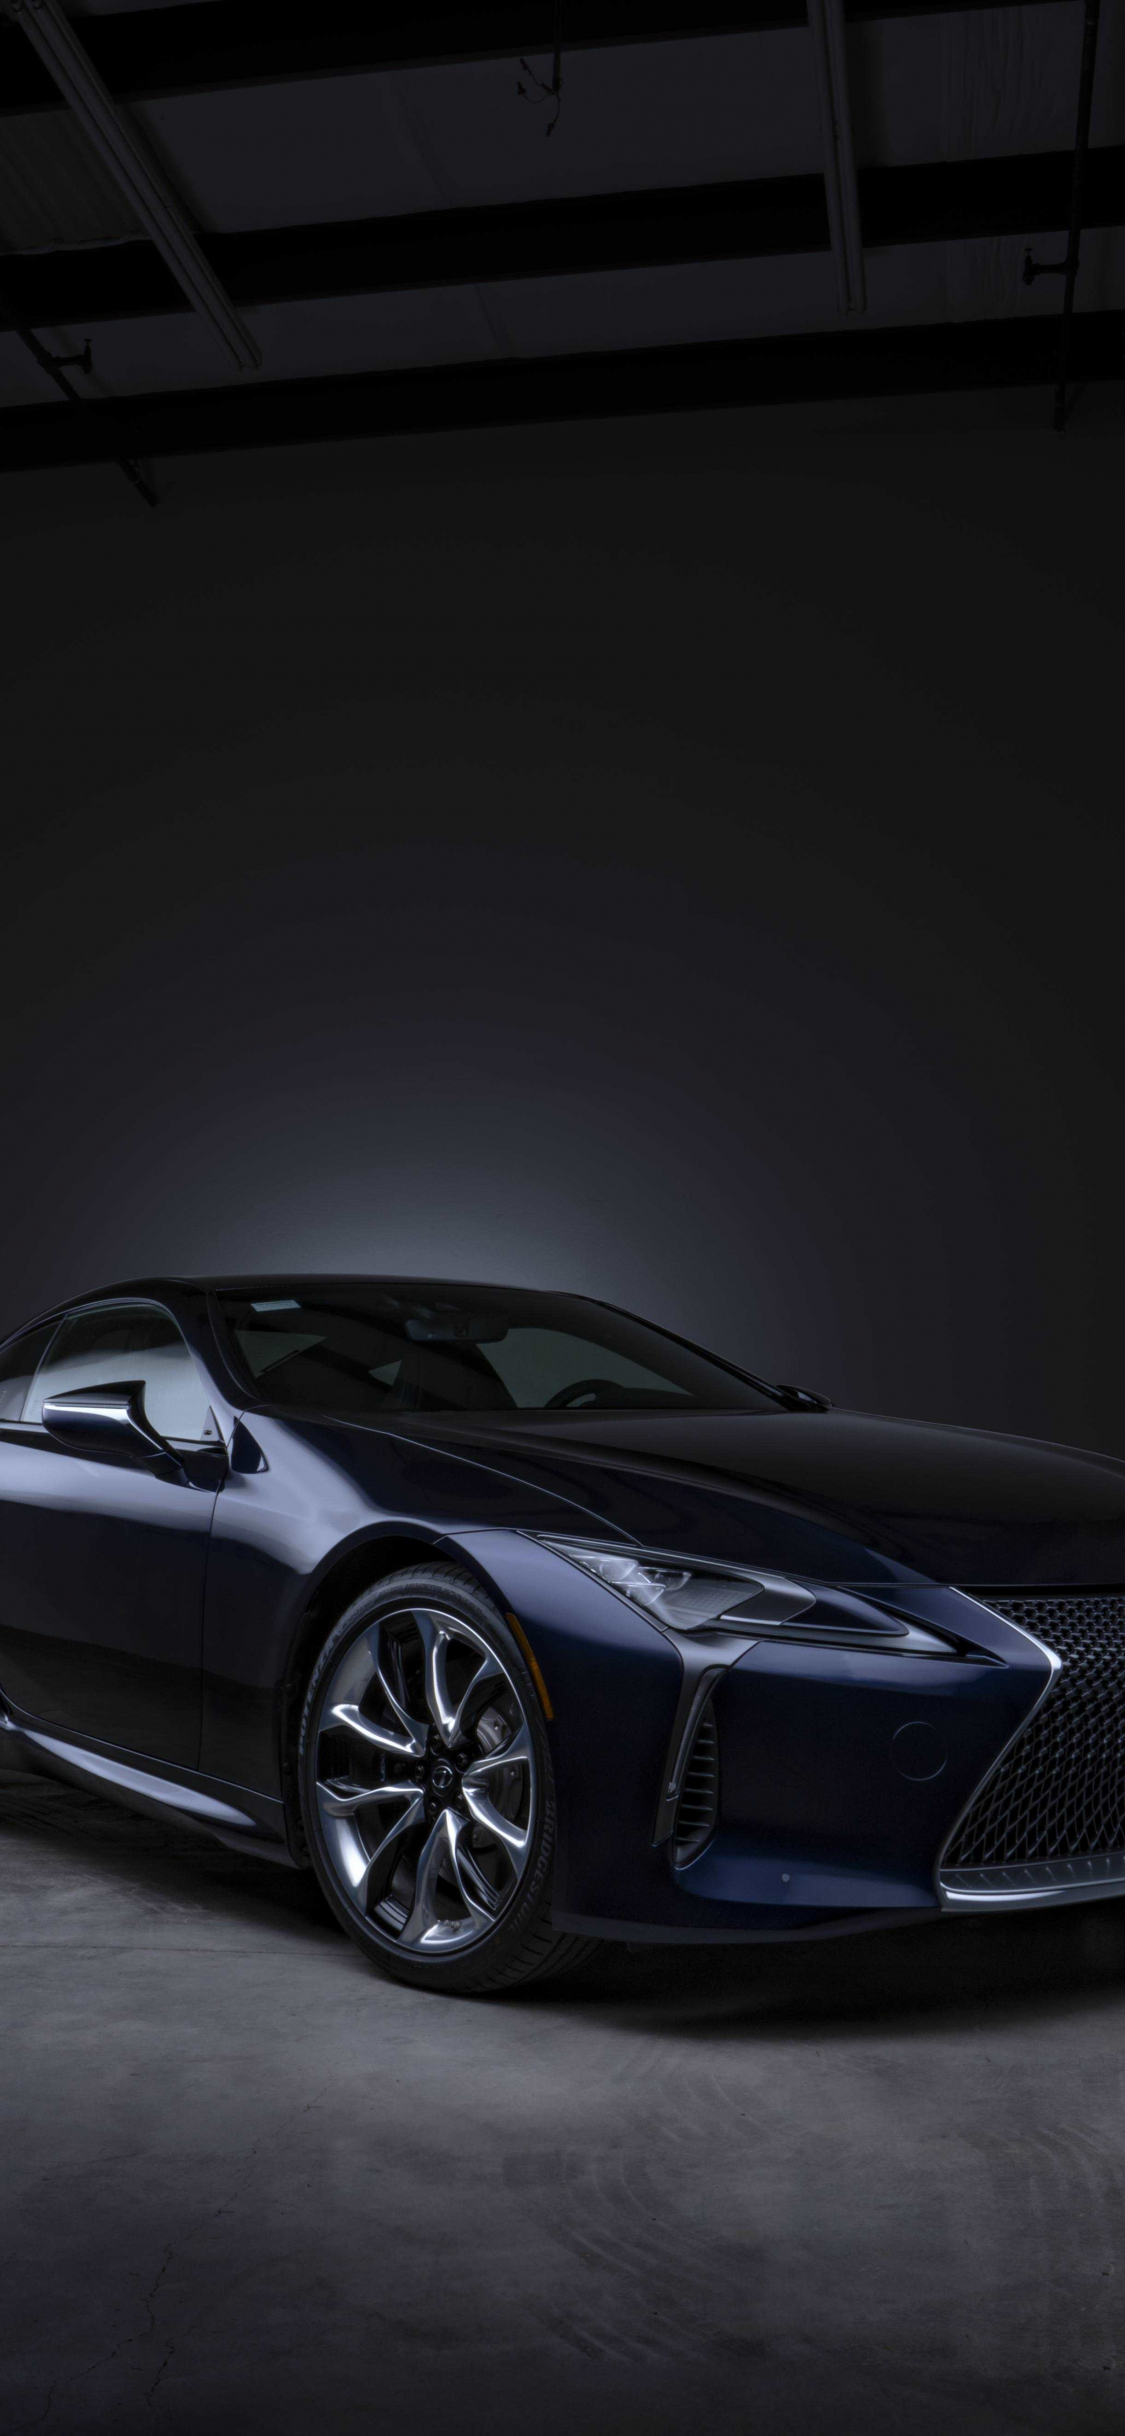 Download Wallpaper 1125x2436 Lexus Black Panther Lc 500 Front Iphone X 1125x2436 Hd Background 3107